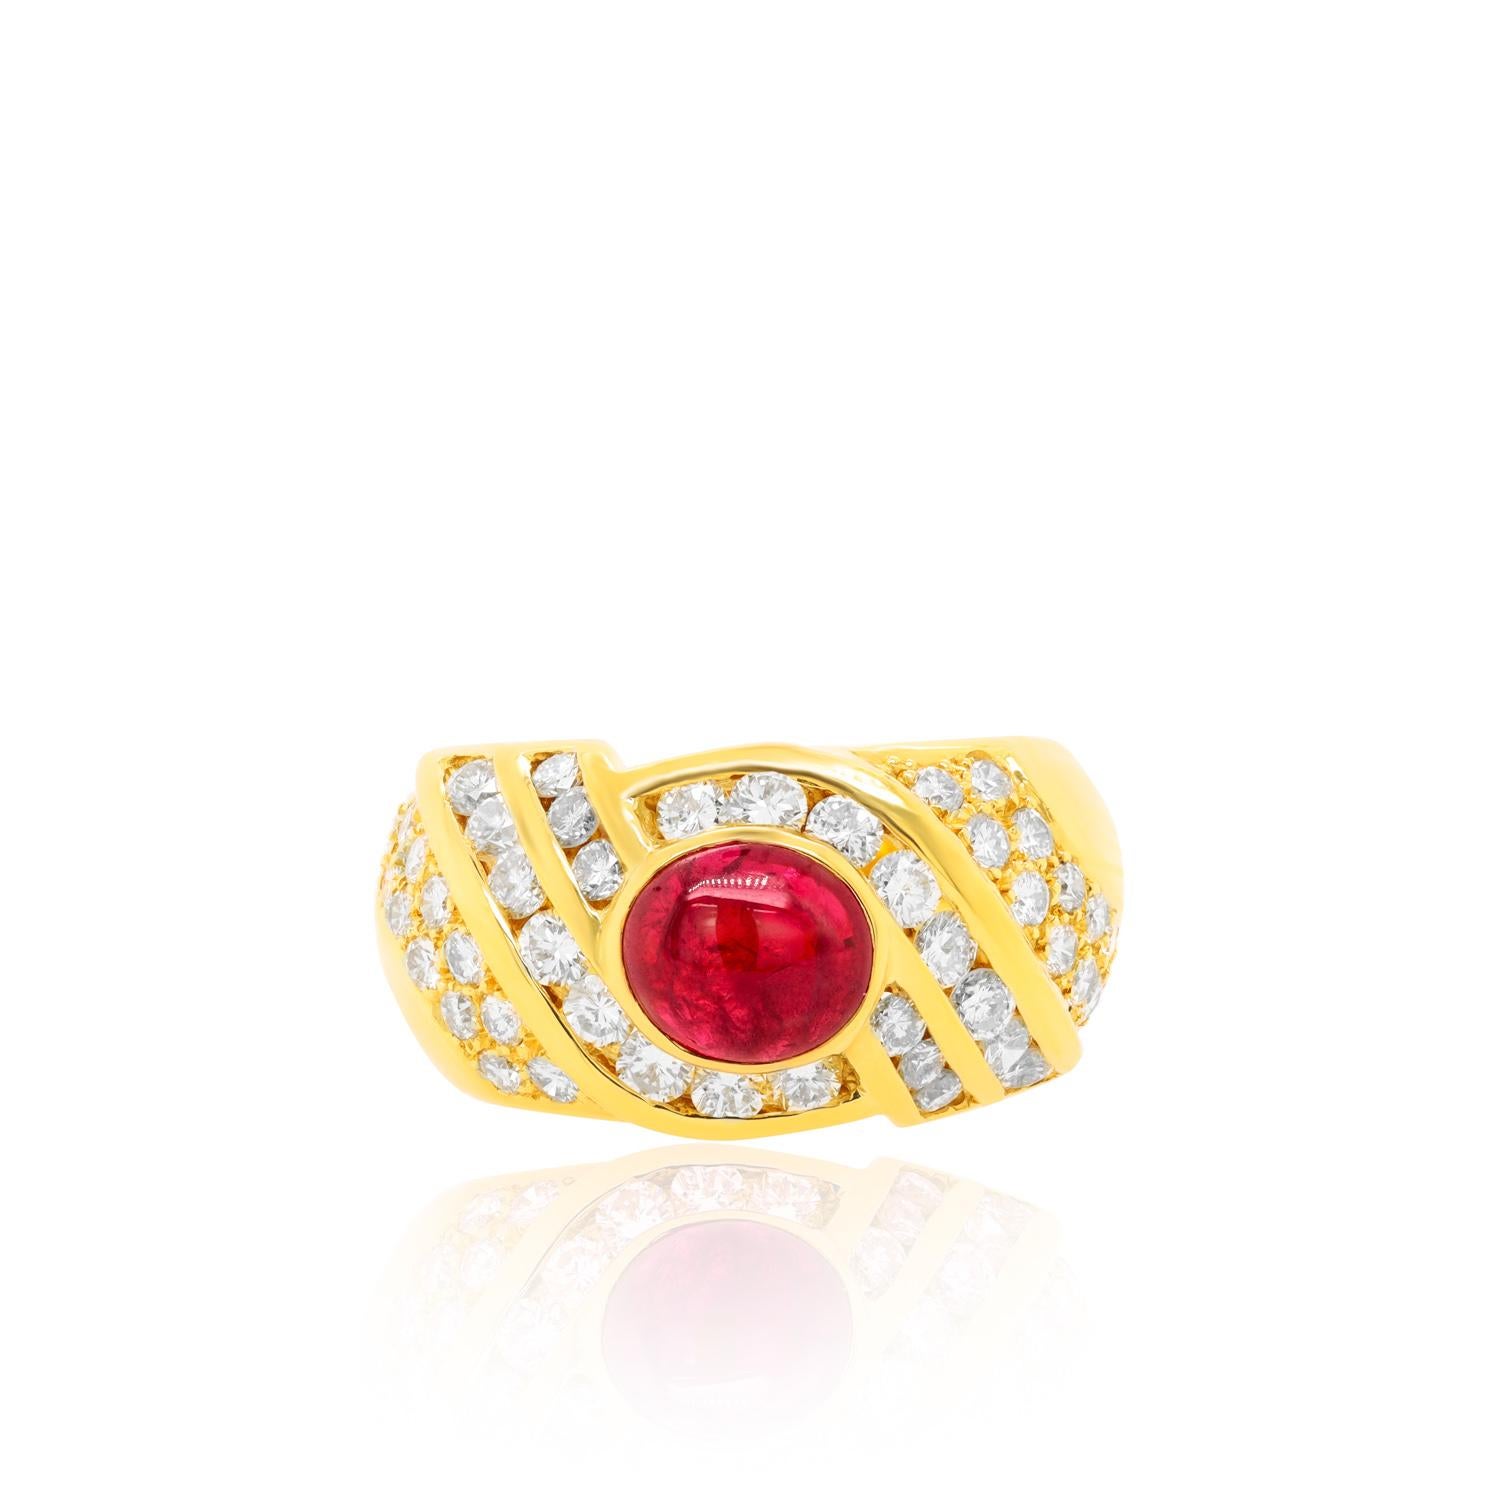 Cushion Cut Diana M.18 kt yellow gold ruby and diamond fashion ring featuring a center 1.50  For Sale